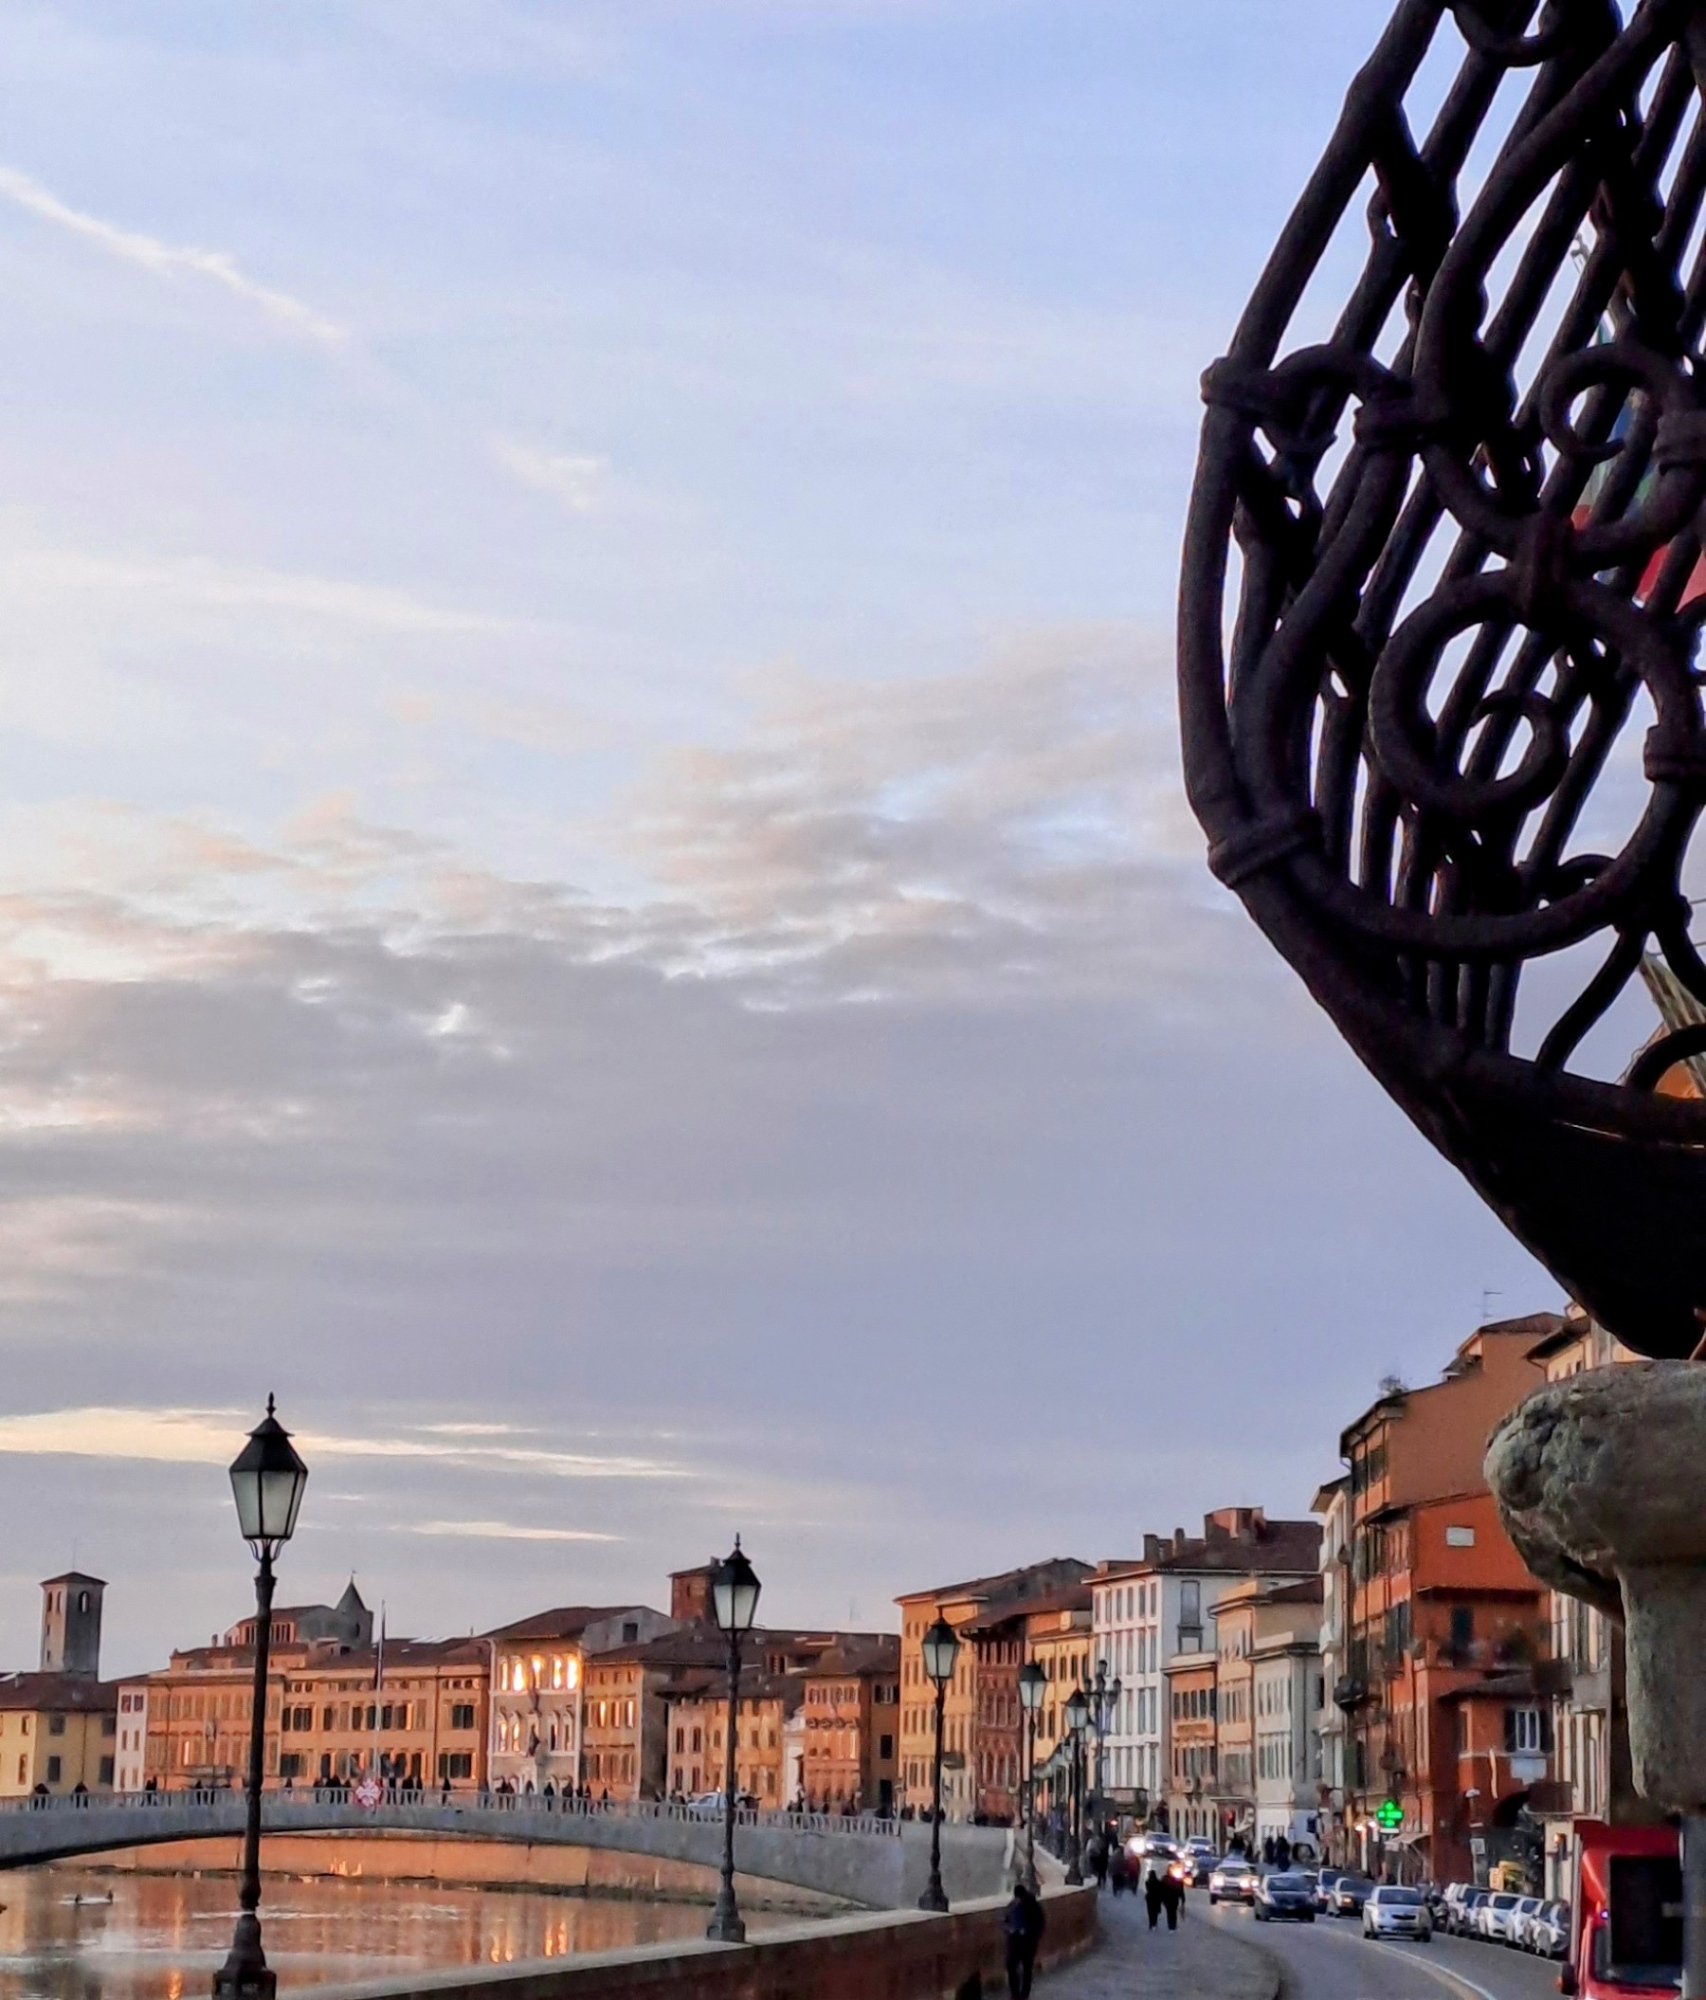 Enjoy a 2-hour small group guided walking tour in Pisa